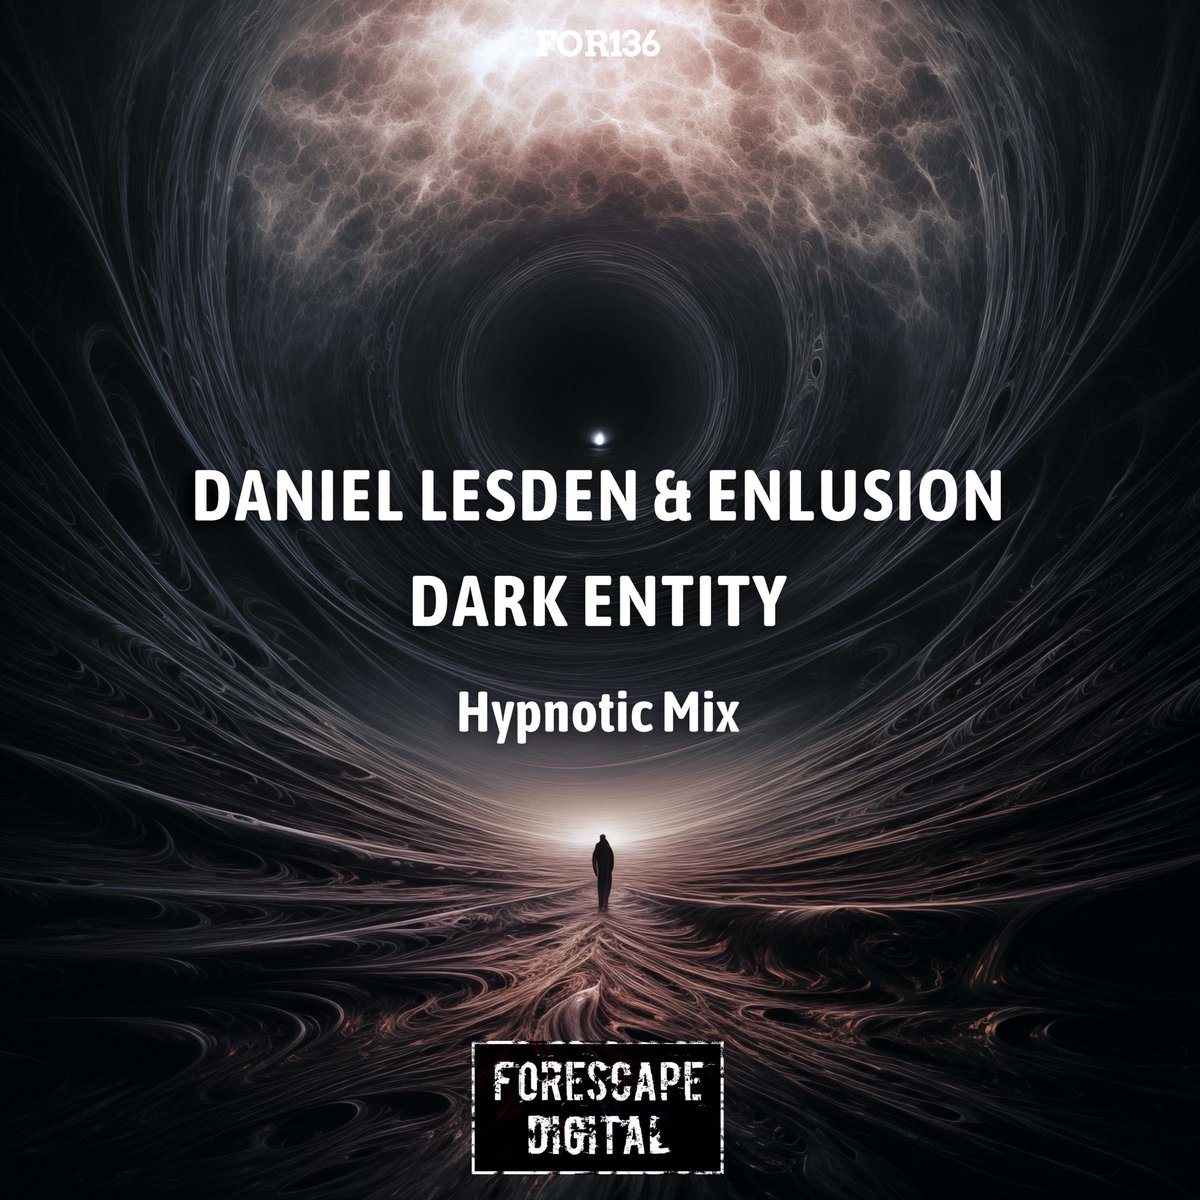 Dark Entity (Hypnotic Mix), an even darker and more hypnotic version of my collaboration with @_Enlusion, is out now! Download it on Beatport: fanlink.to/dark-entity #raw #deep #hypnotic